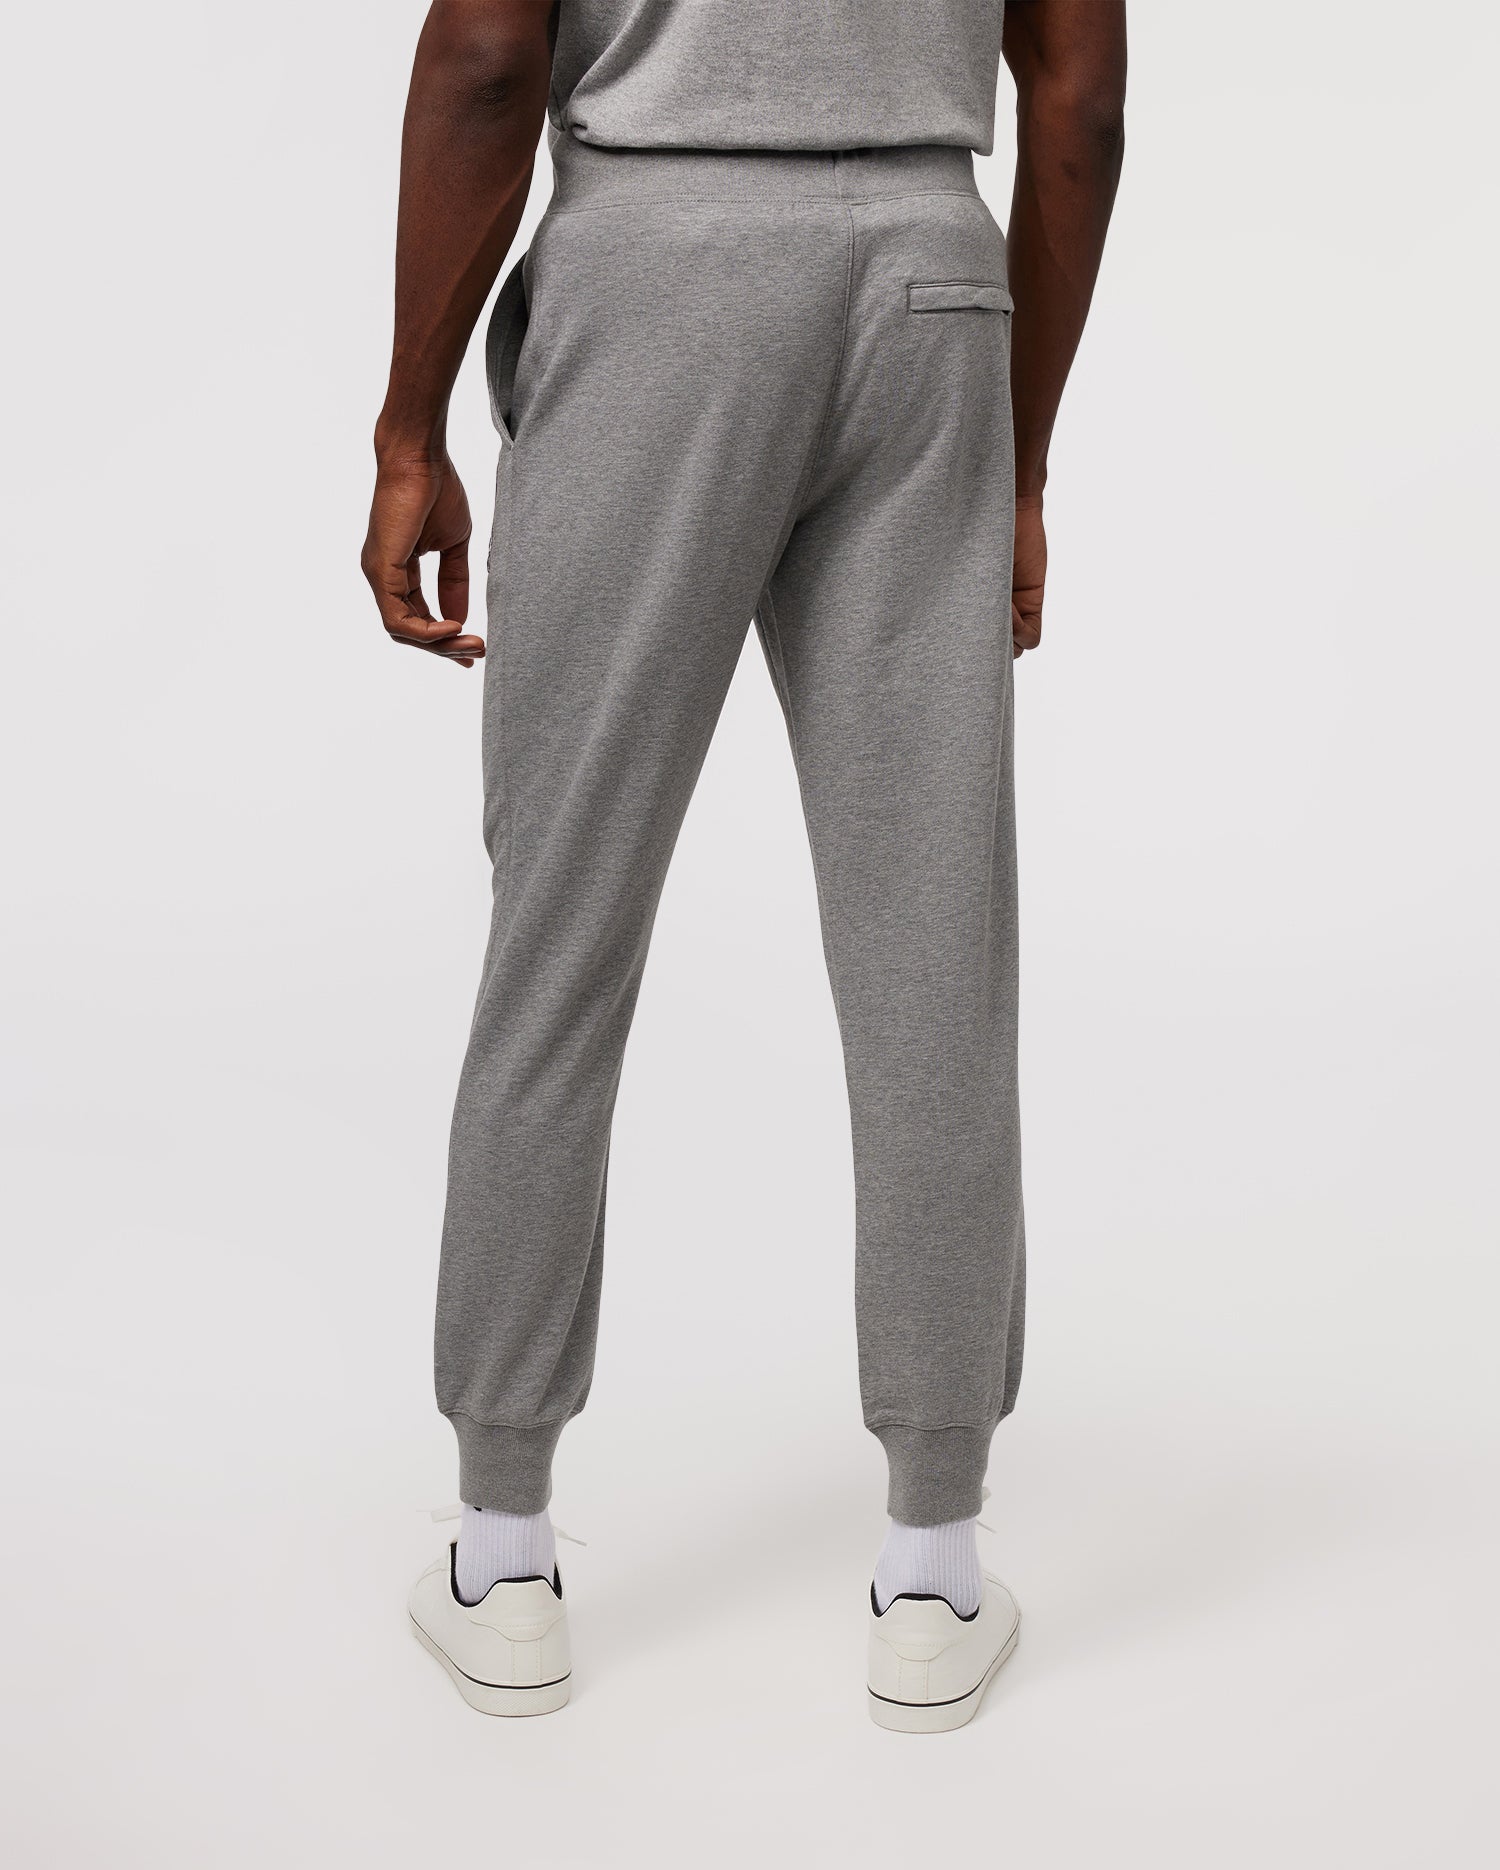 MENS GREY YORKVILLE EMBROIDERED SWEATPANT | PSYCHO BUNNY – Psycho Bunny